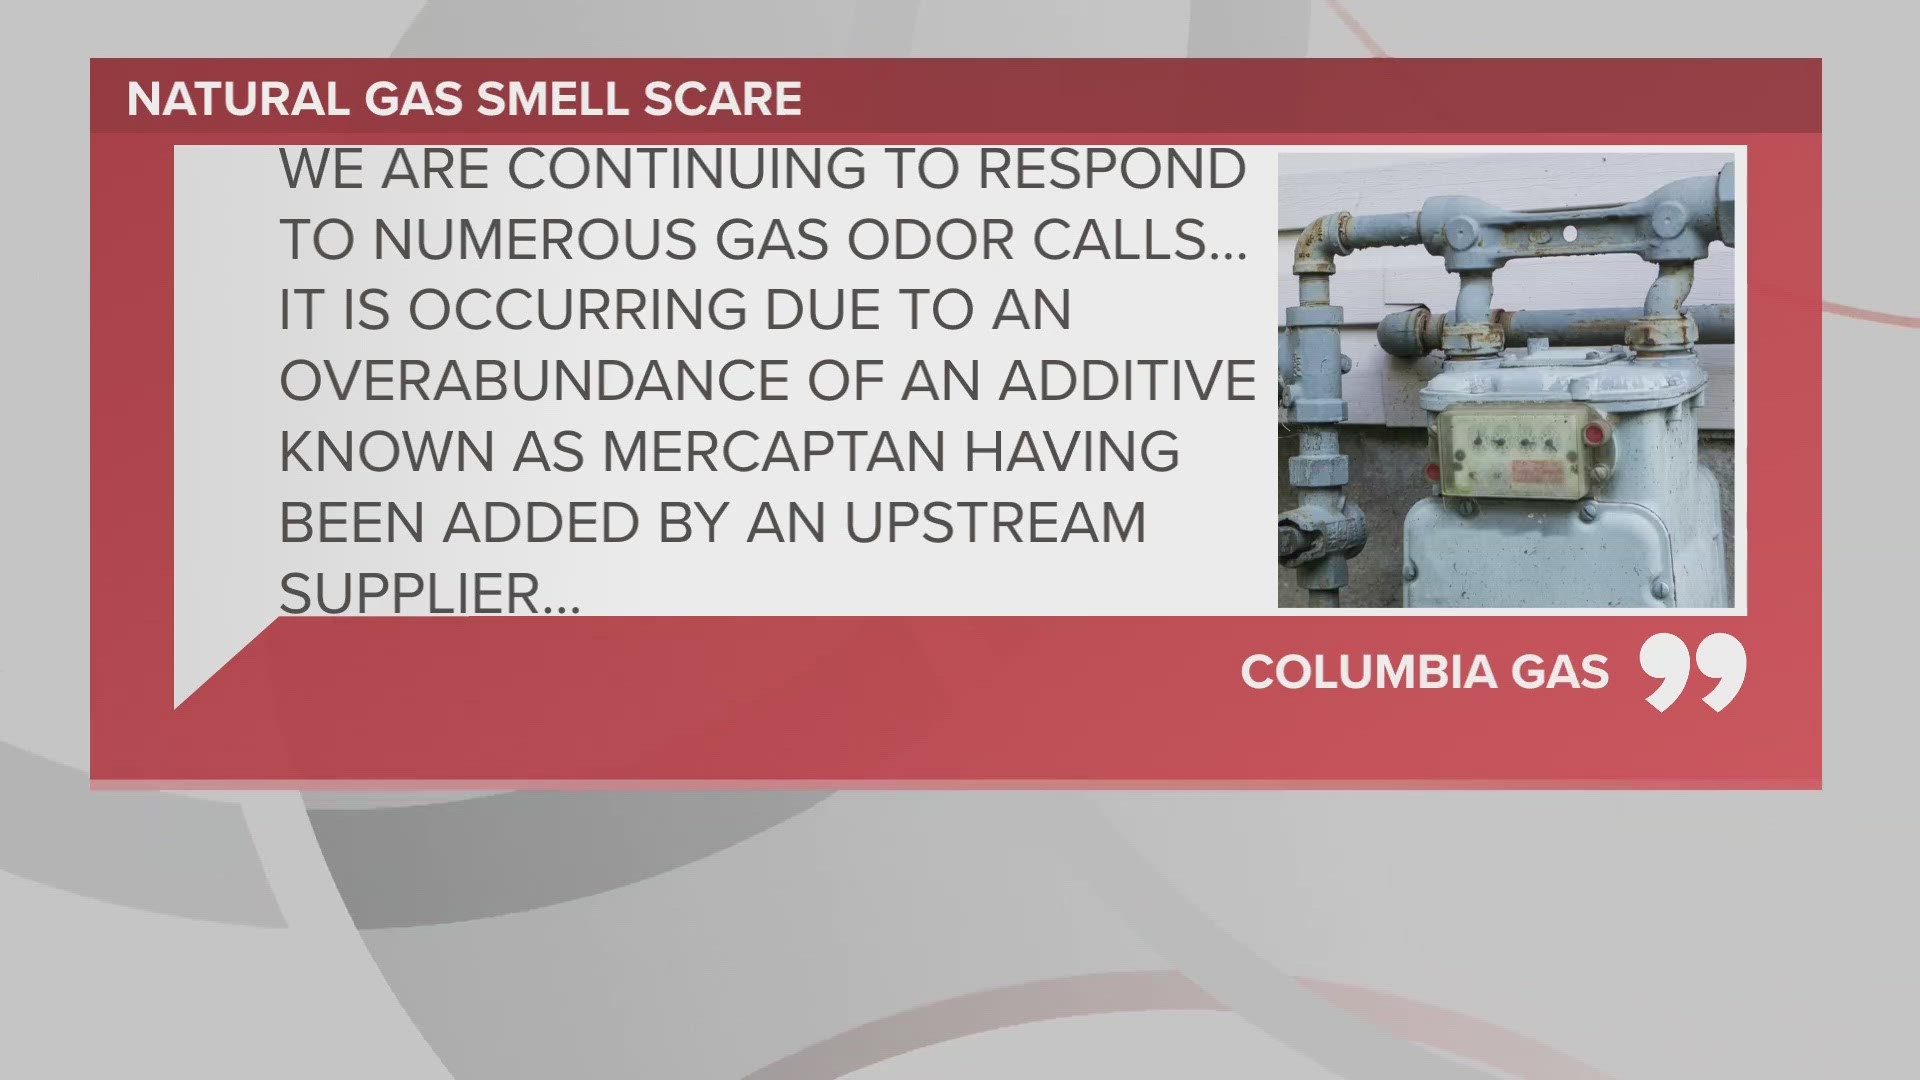 'Our crews are aware of a gas odor in some parts of our service territory. The situation is safe, and the source of the odor is known,' according to Columbia Gas.